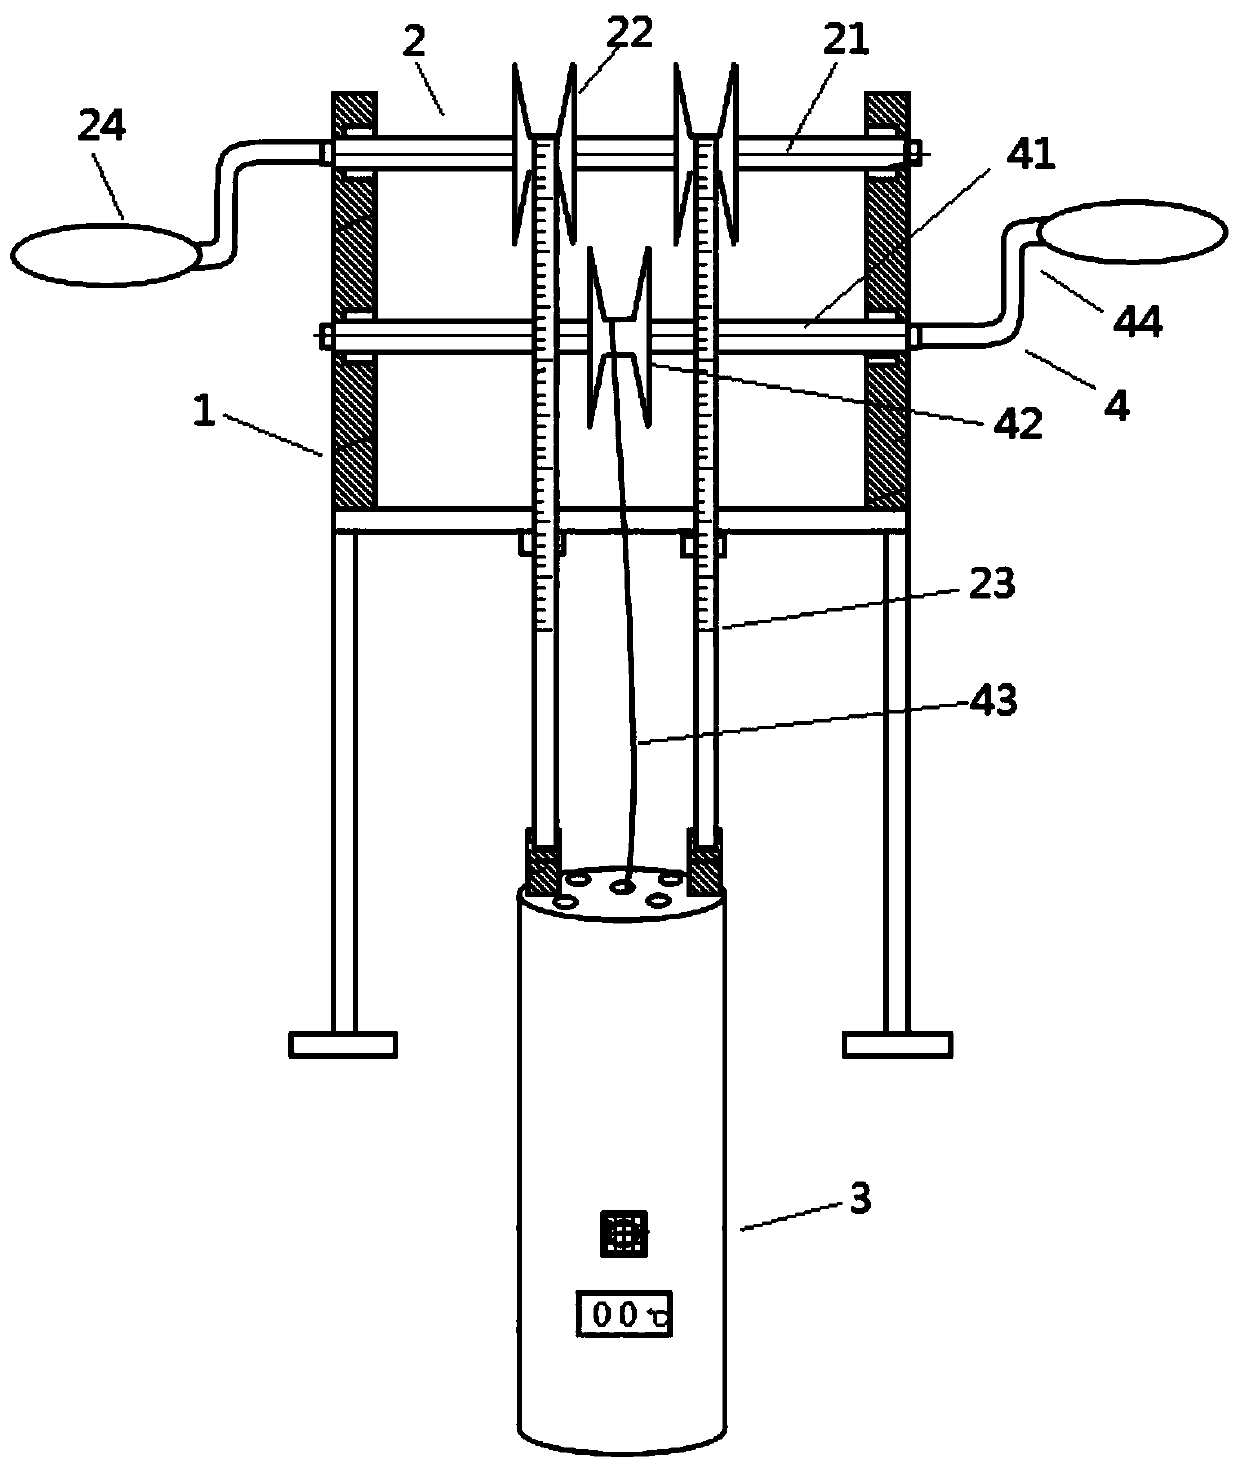 High-fidelity depthkeeping water sample acquisition device